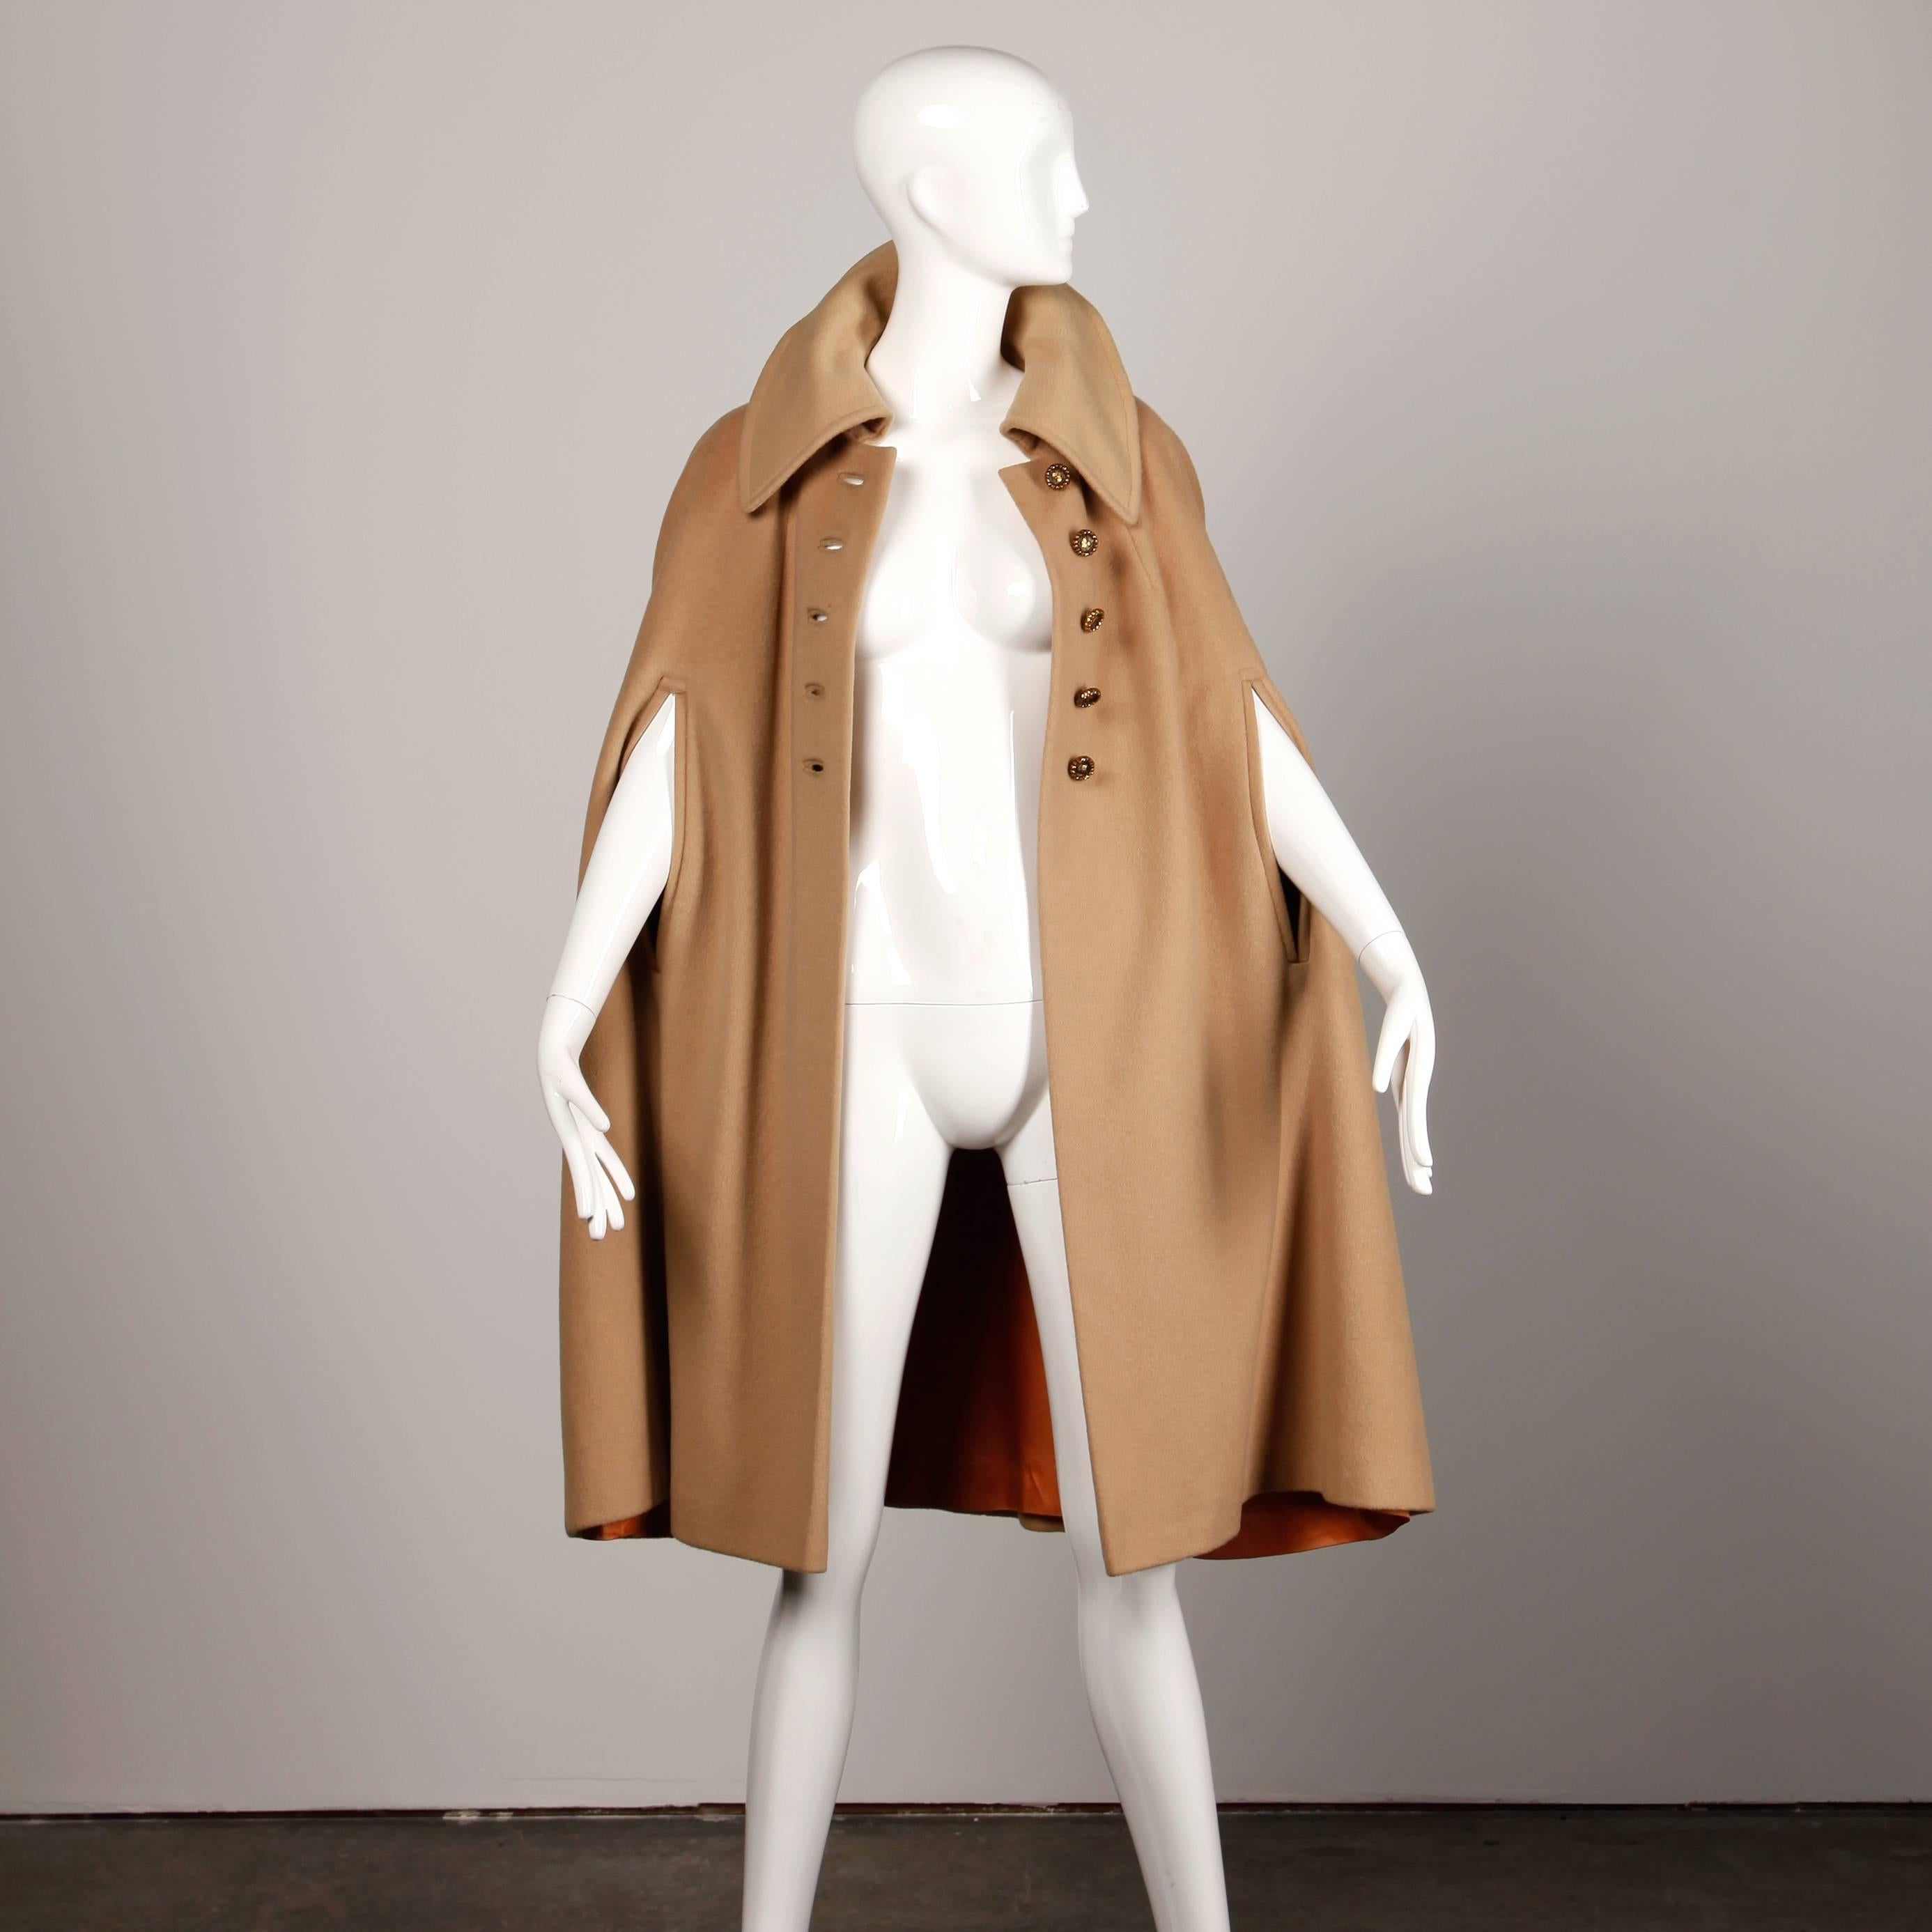 Chic vintage 1970s camel wool cape coat with oversized collar and arm slits.

Details: 

Fully Lined
Button Front Closure
Marked Size: Unmarked
Estimated Size: Free (S-L
Color: Camel
Fabric: Wool
Label: Youthcraft

Measurement: 
Total